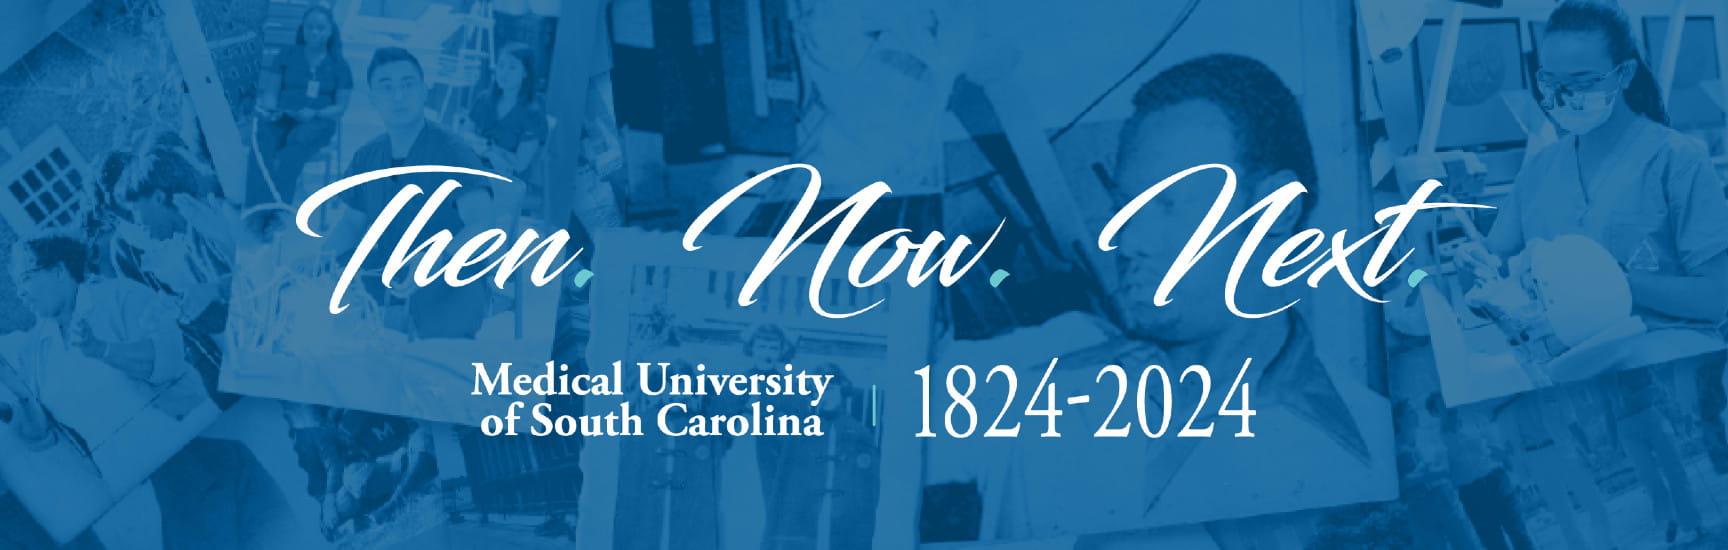 Collage of historical photographs on a blue background with the following text superimposed: Then. Now. Next. | Medical University of South Carolina | 1824 to 2024